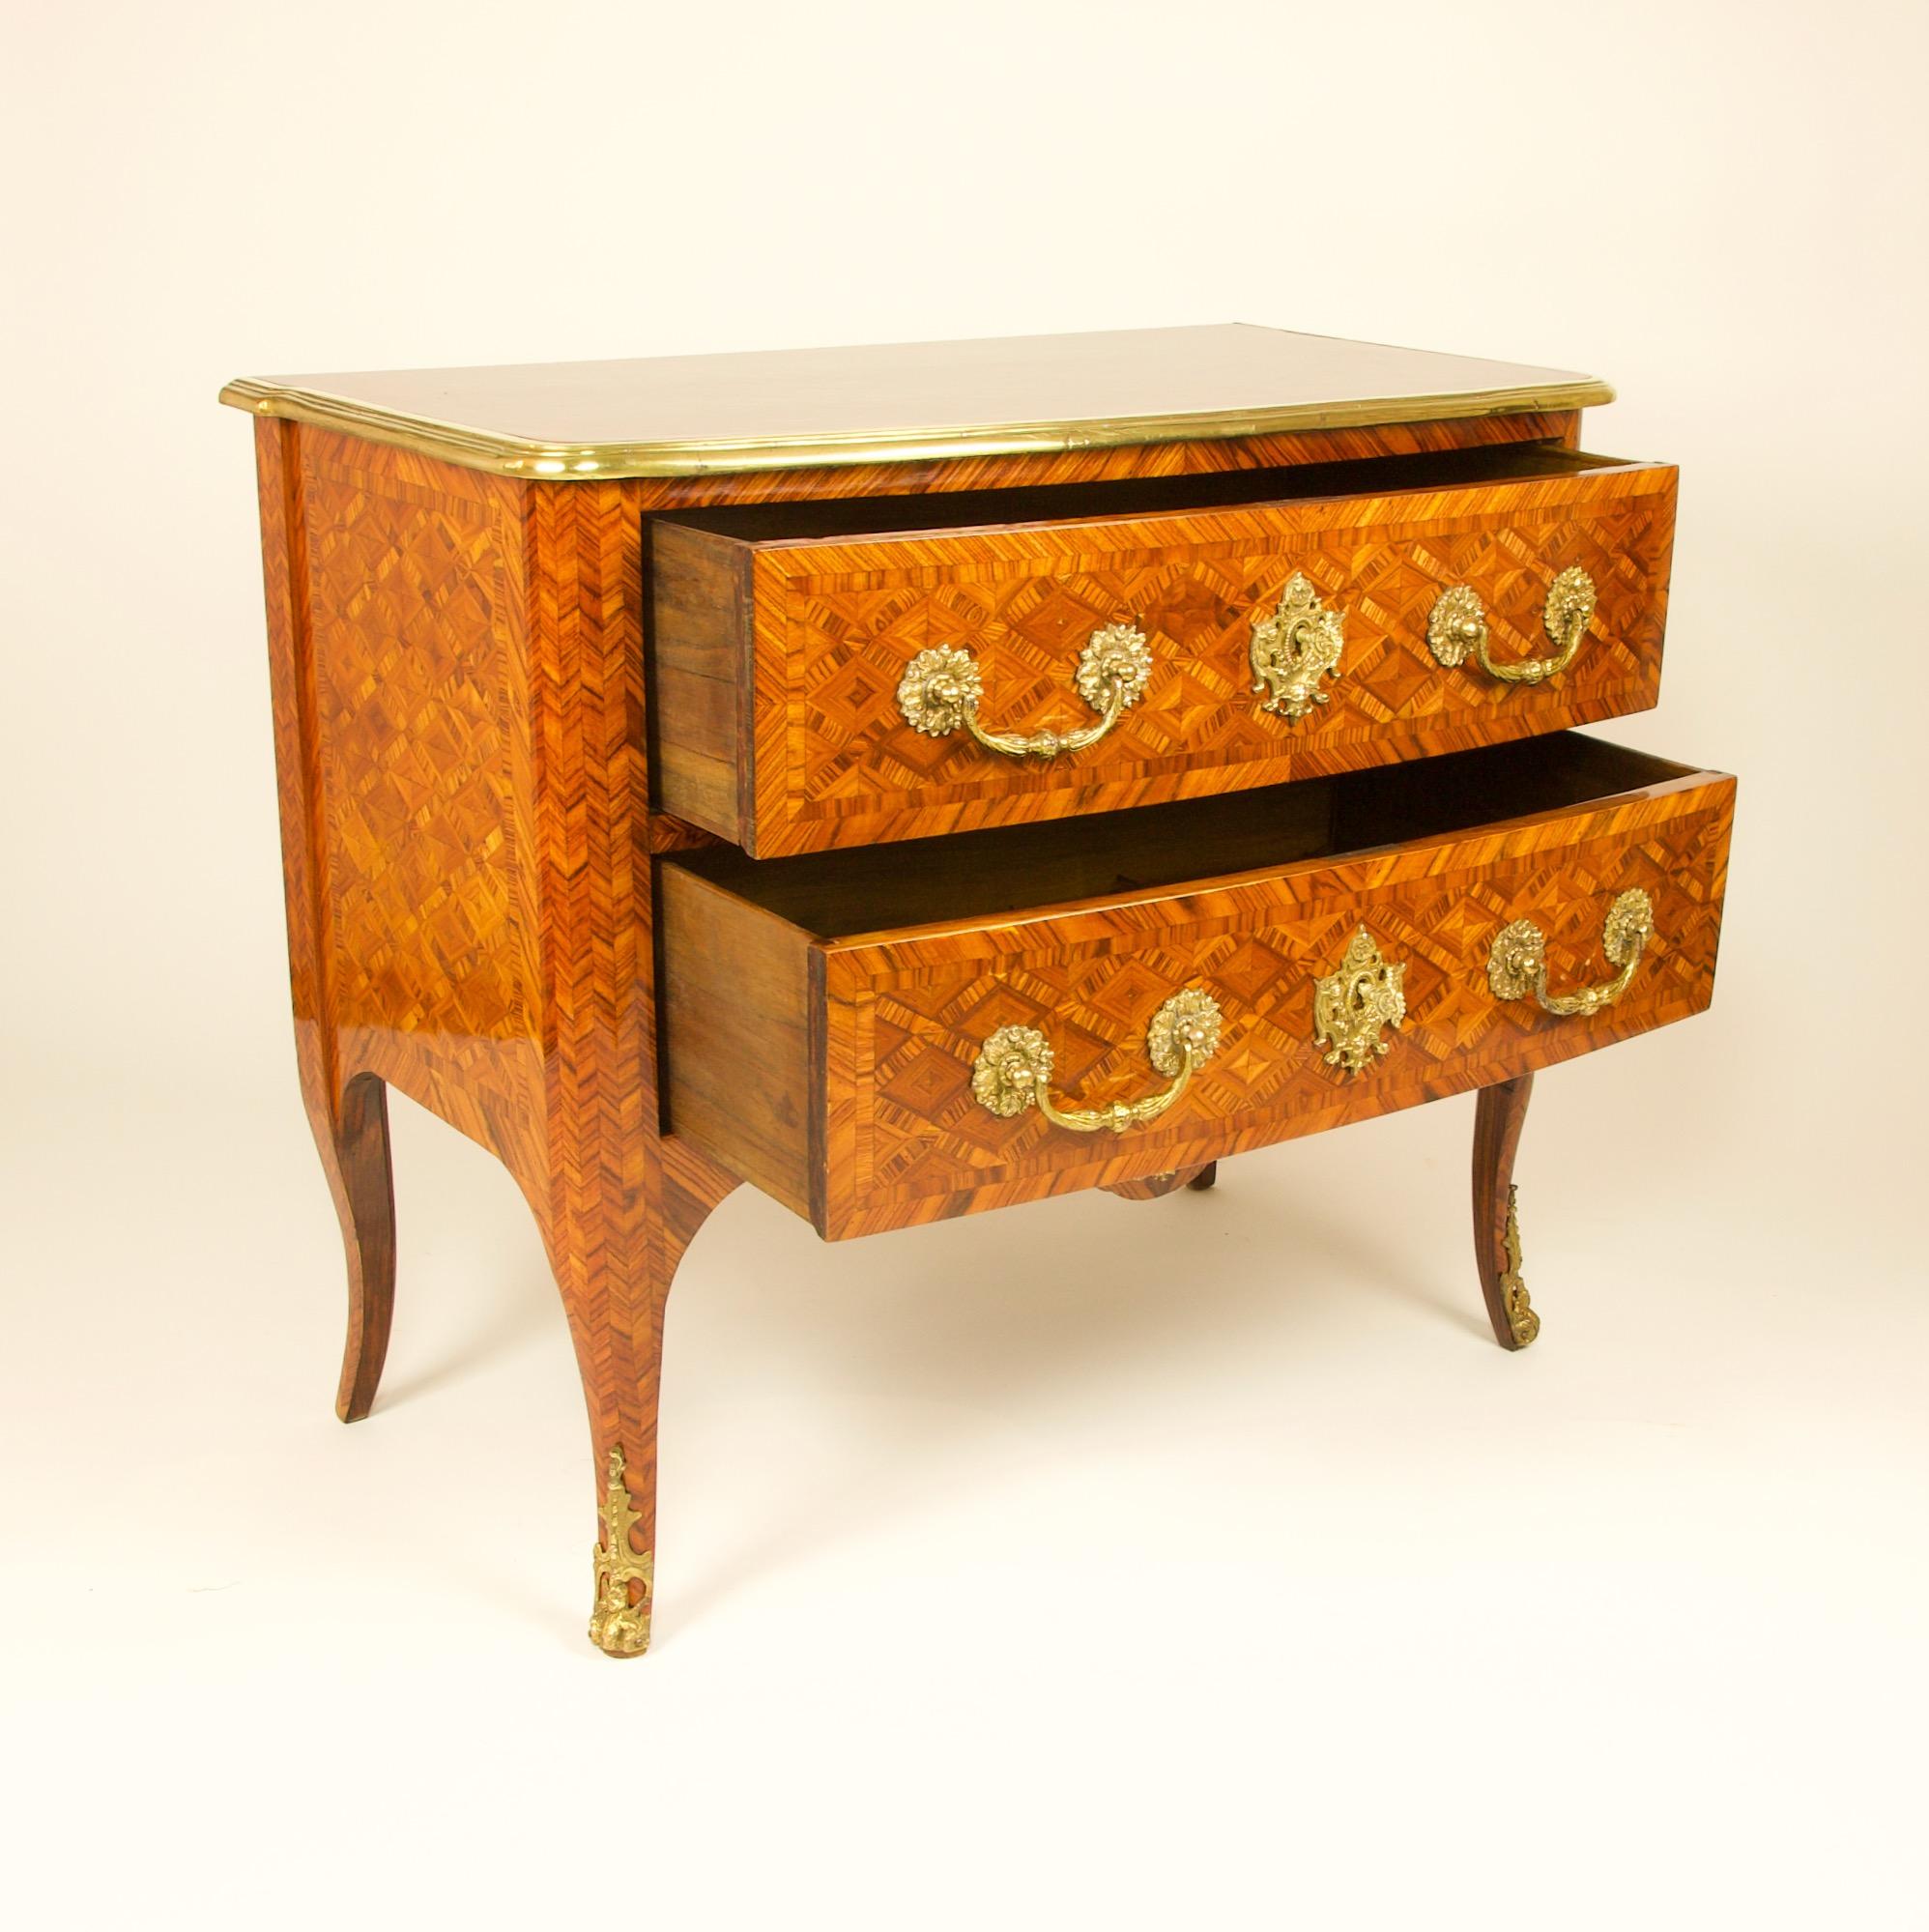 19th Century French Louis XIV Régence Trelliswork Marquetry Commode or Sauteuse For Sale 4